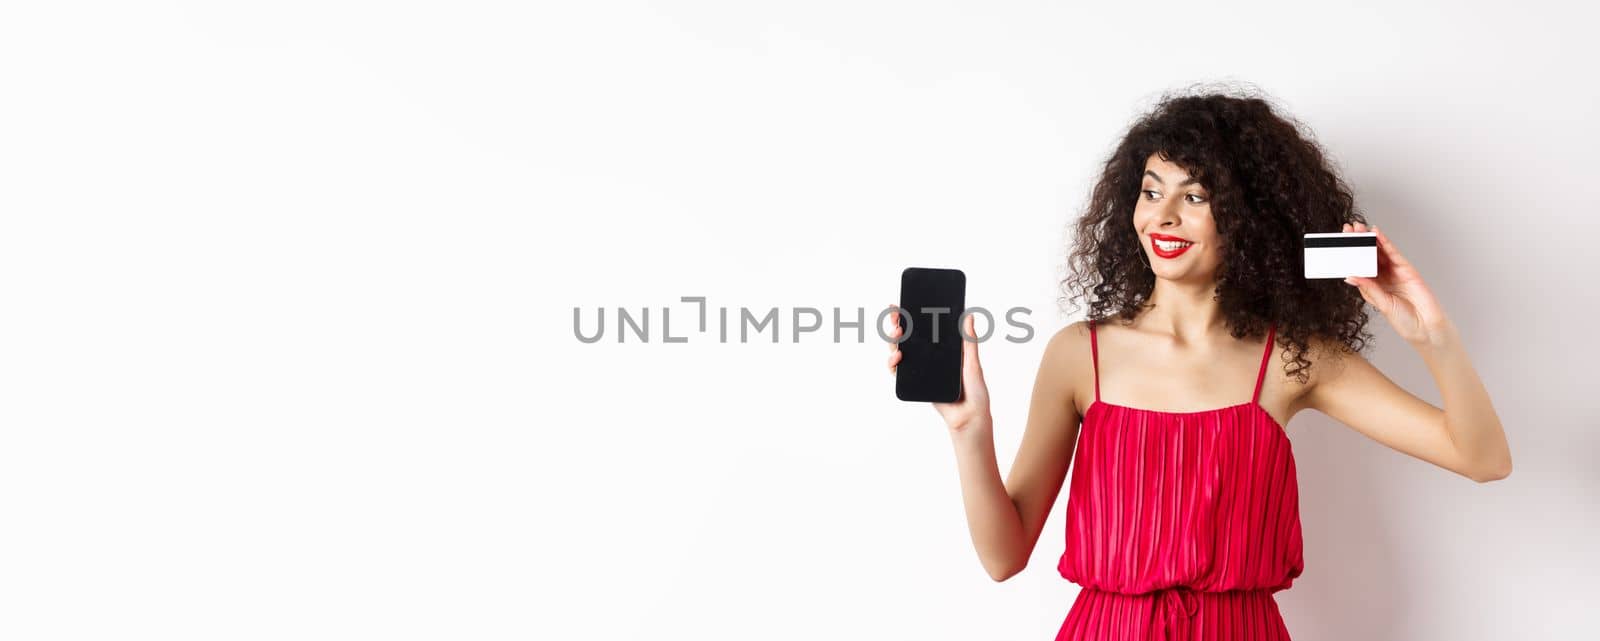 Online shopping concept. Elegant curly-haired woman in red dress showing plastic credit card and empty mobile phone screen, standing over white background.